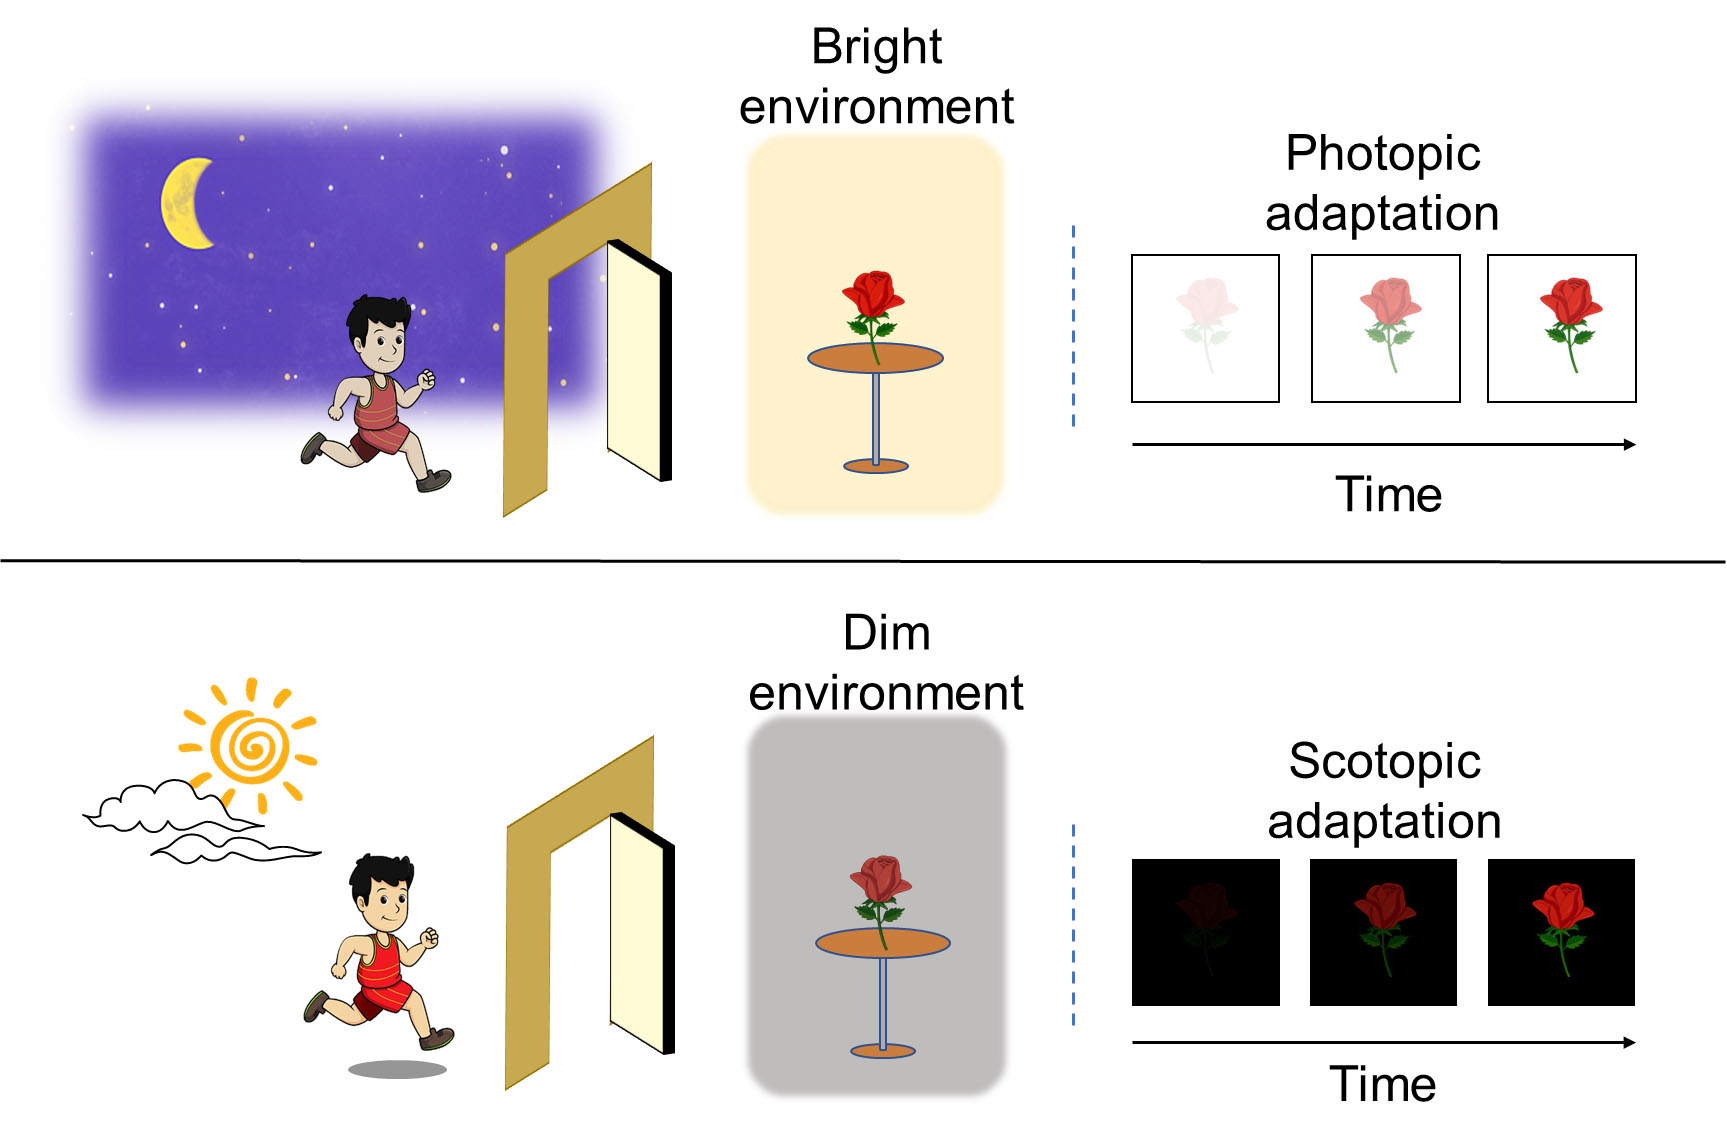 Bioinspired visual adaptation to different light intensities of environment